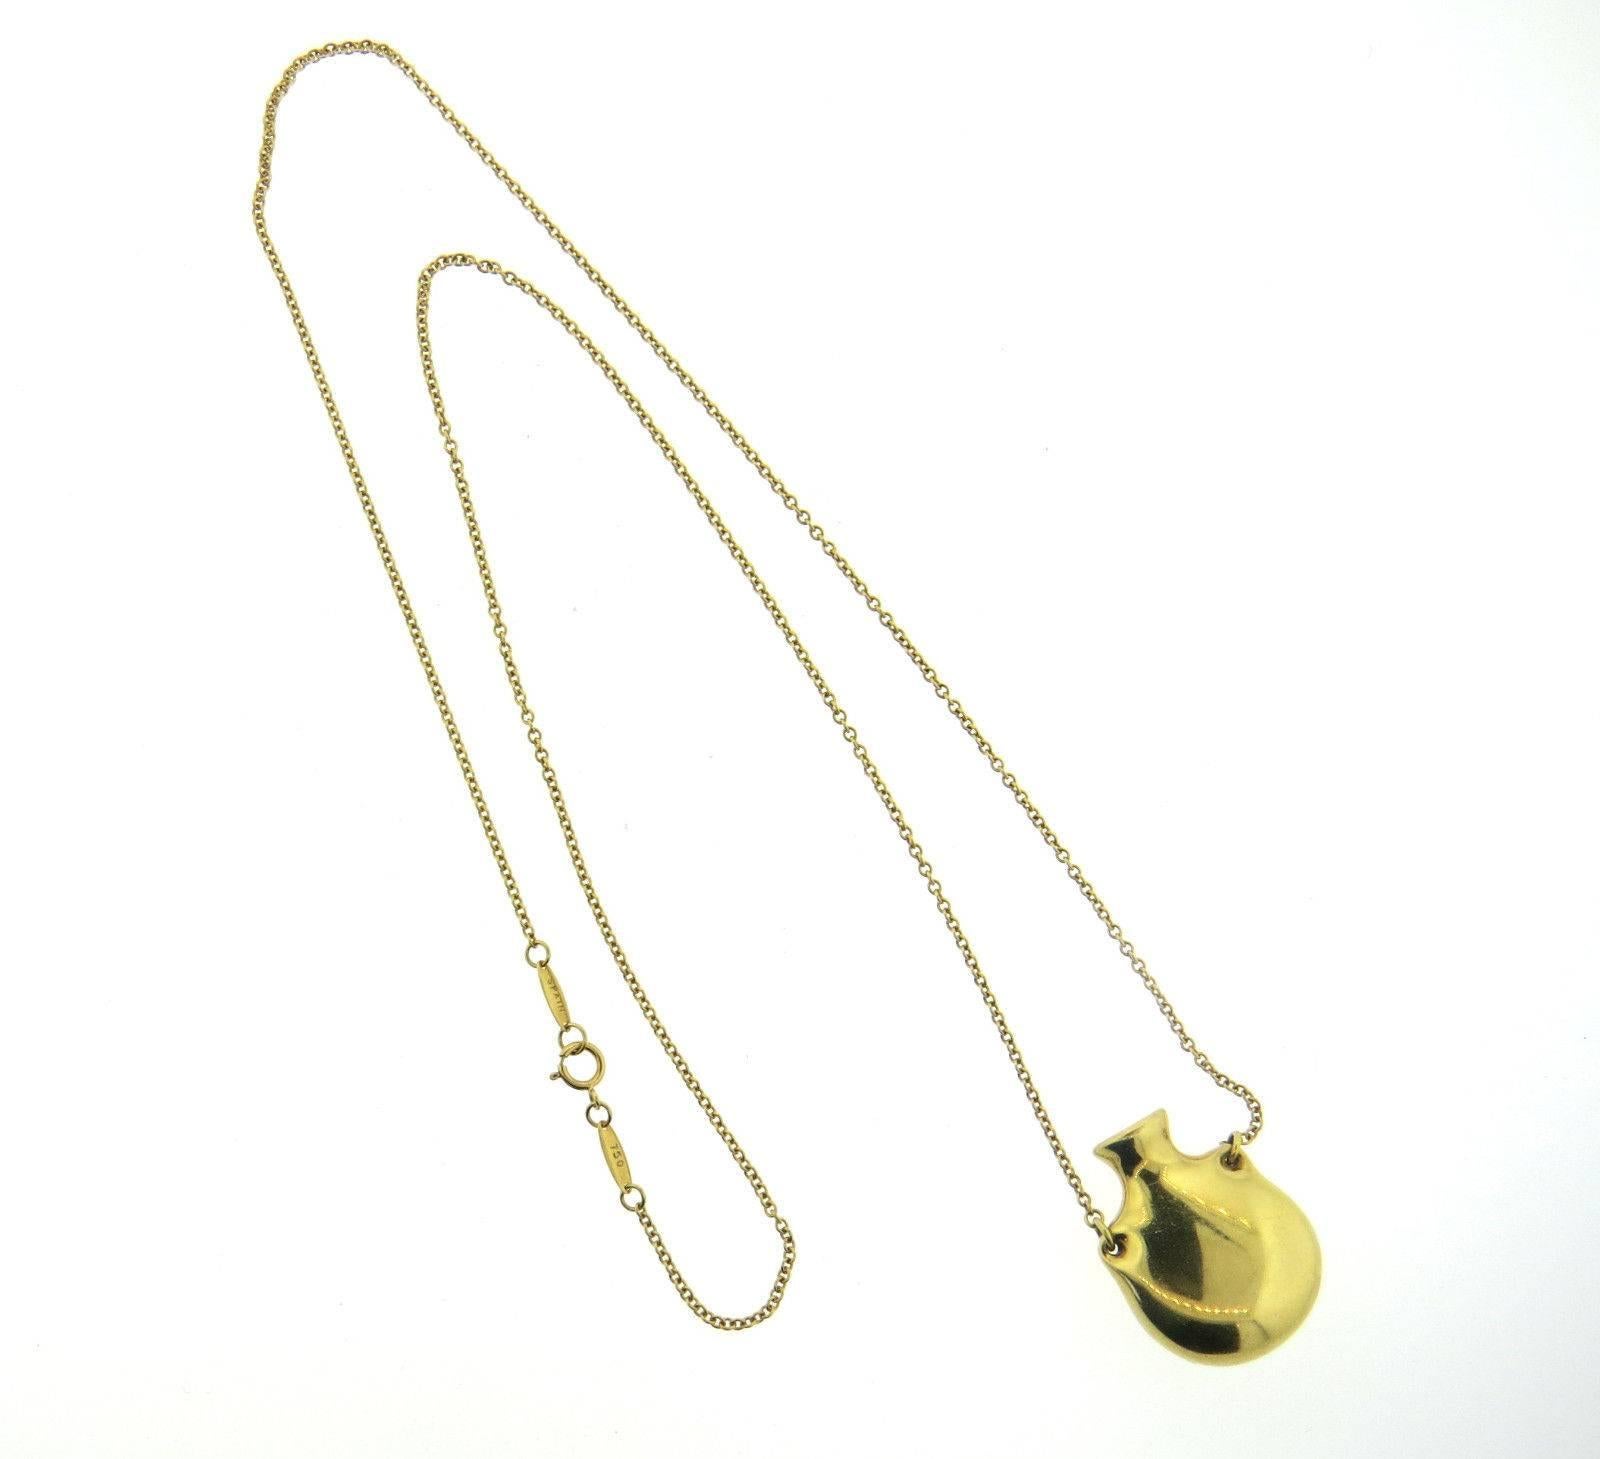 An 18k yellow gold perfume bottle pendant necklace.  Crafted by Elsa Peretti for Tiffany & Co, the necklace is 25